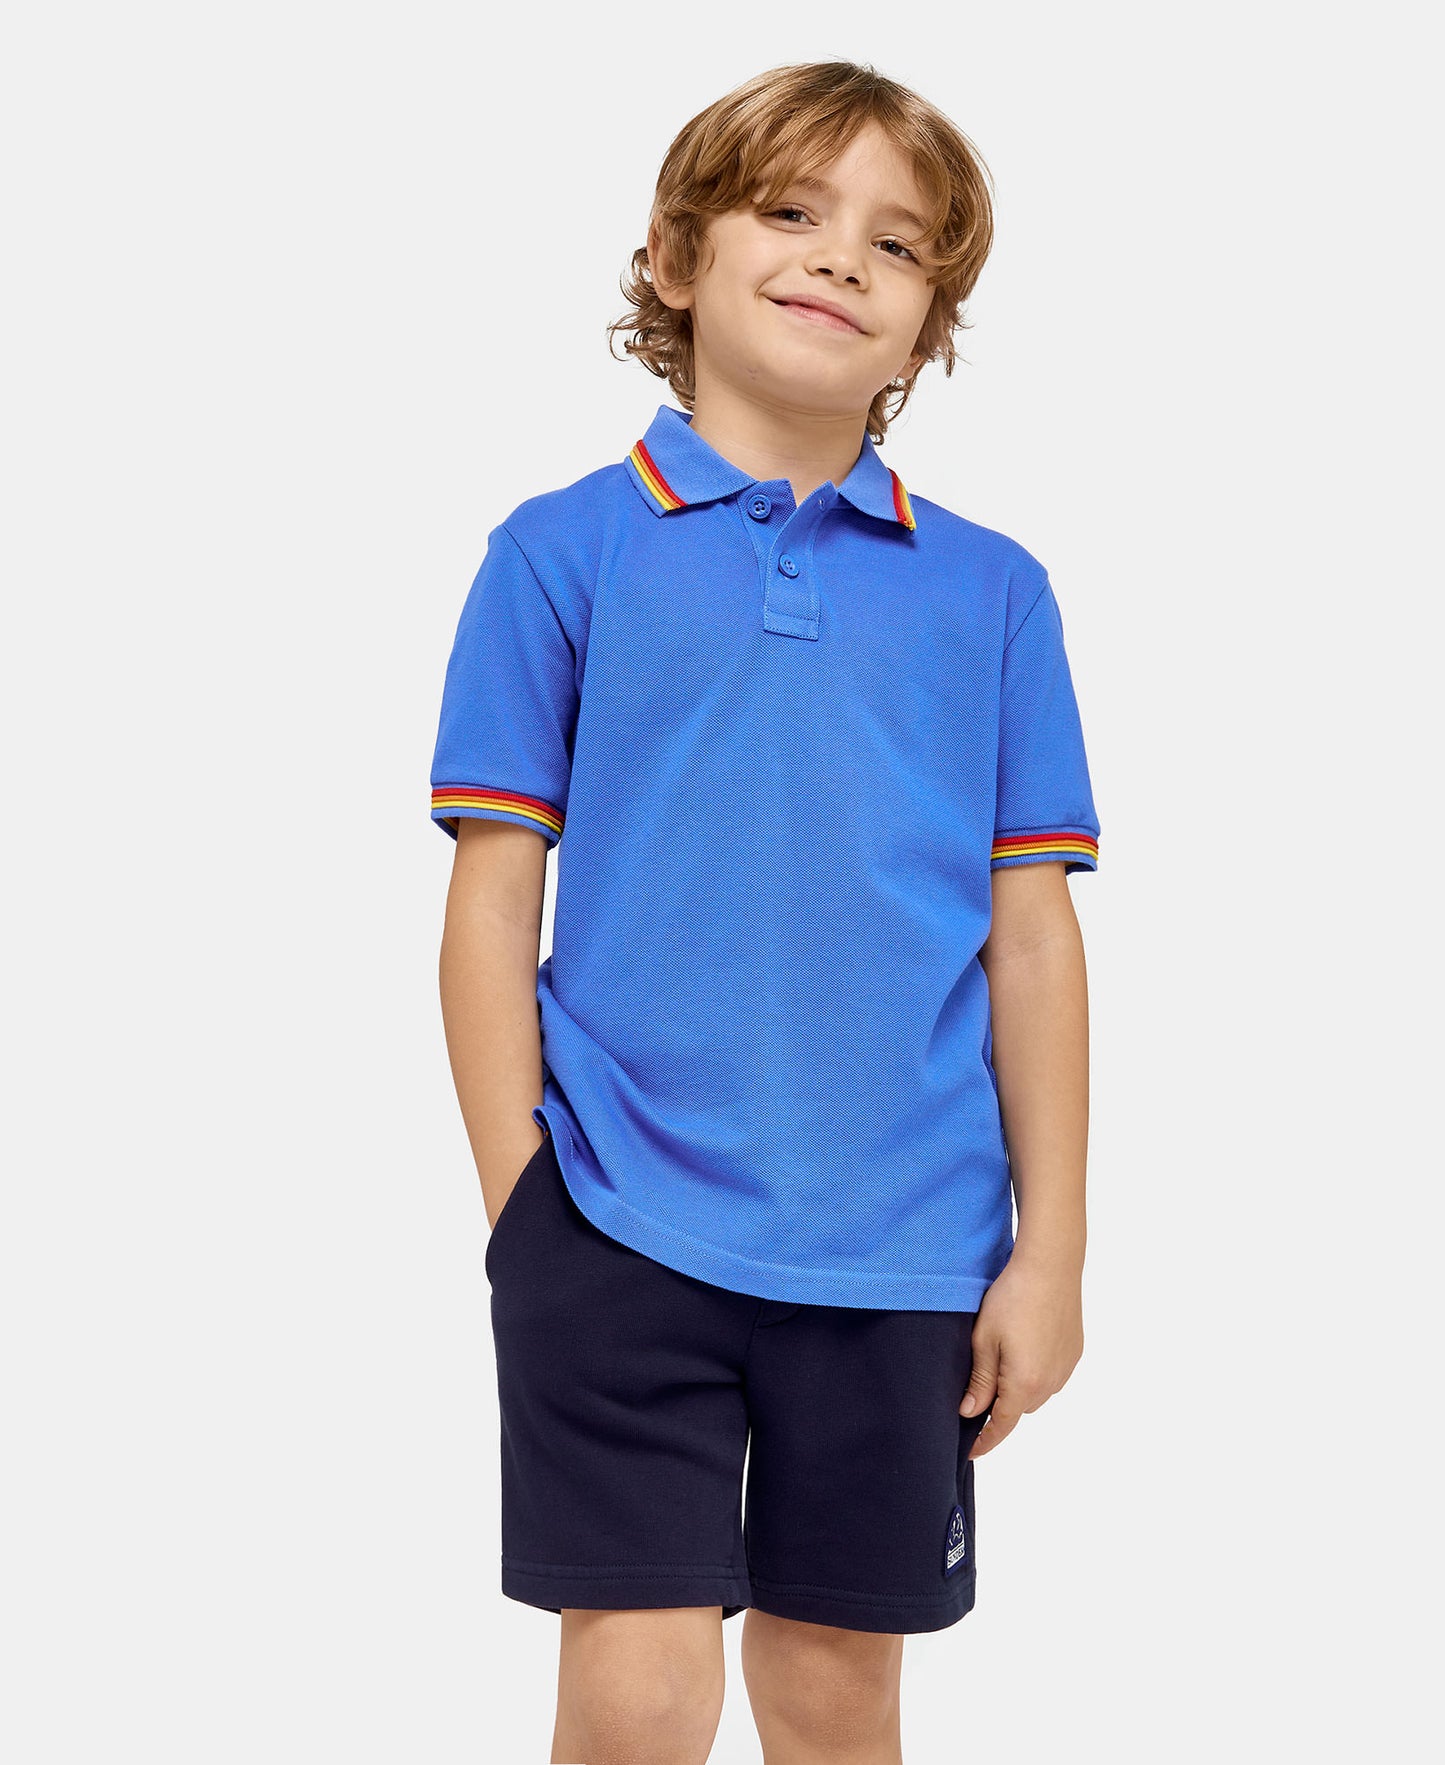 Load image into Gallery viewer, boy wearing a Blue Polo Shirt
